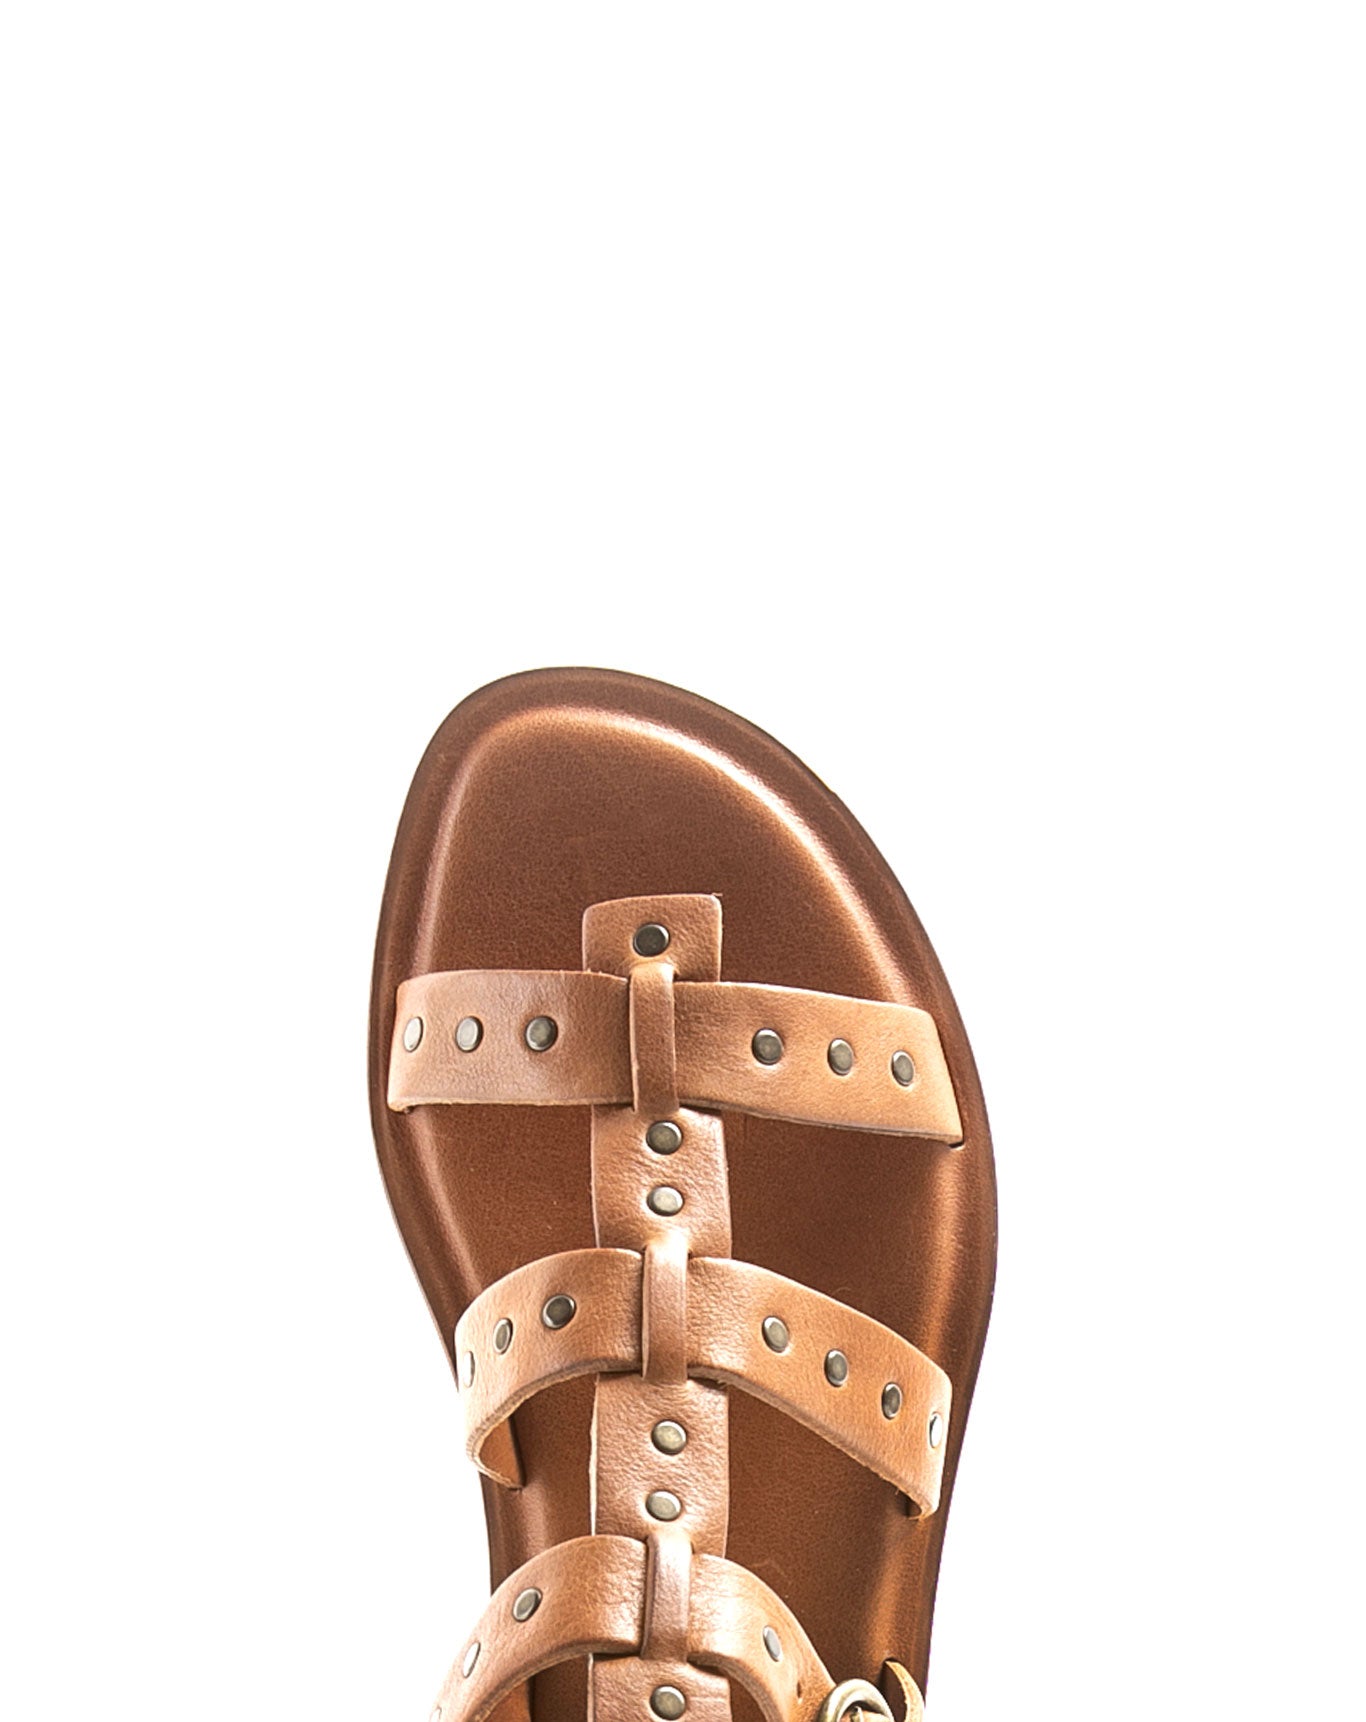 FIORENTINI + BAKER, ZANTE ZEN, Extremely comfortable and supple lined leather sandal with buckled straps and studs. Handcrafted by skilled artisans. Made in Italy. Made to last.